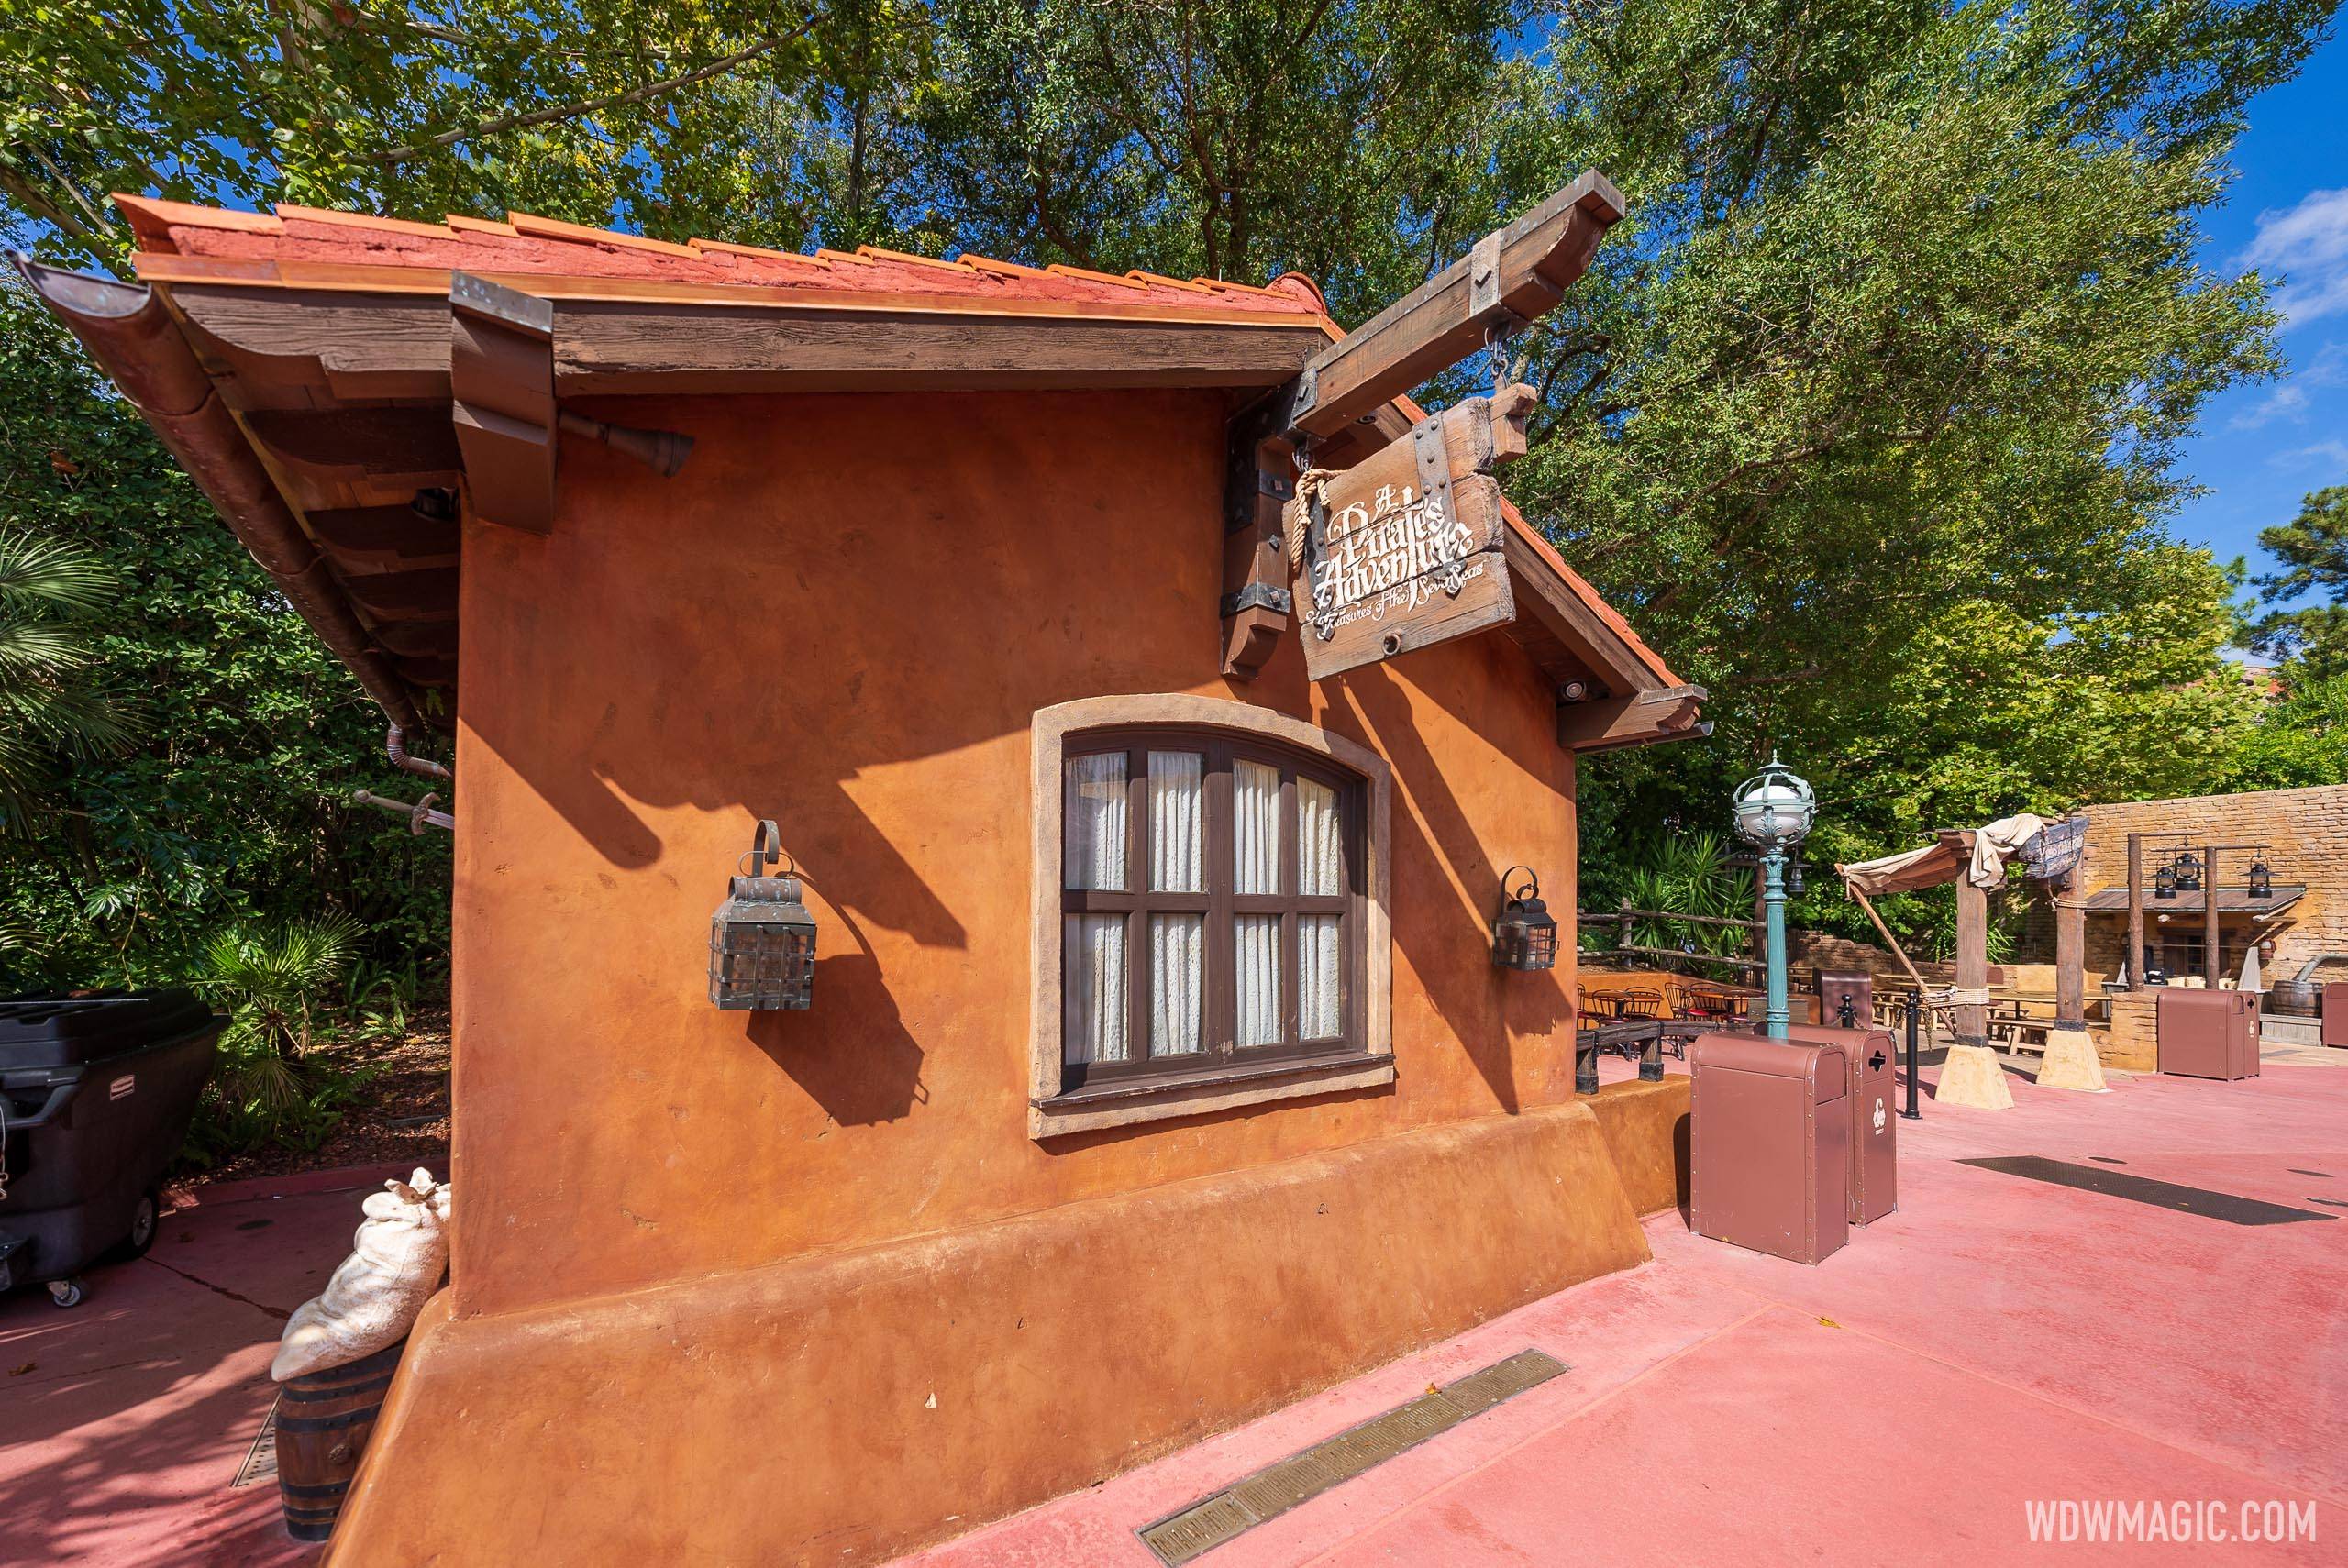 Operating hours reduced for A Pirate's Adventure Treasures of the Seven Seas